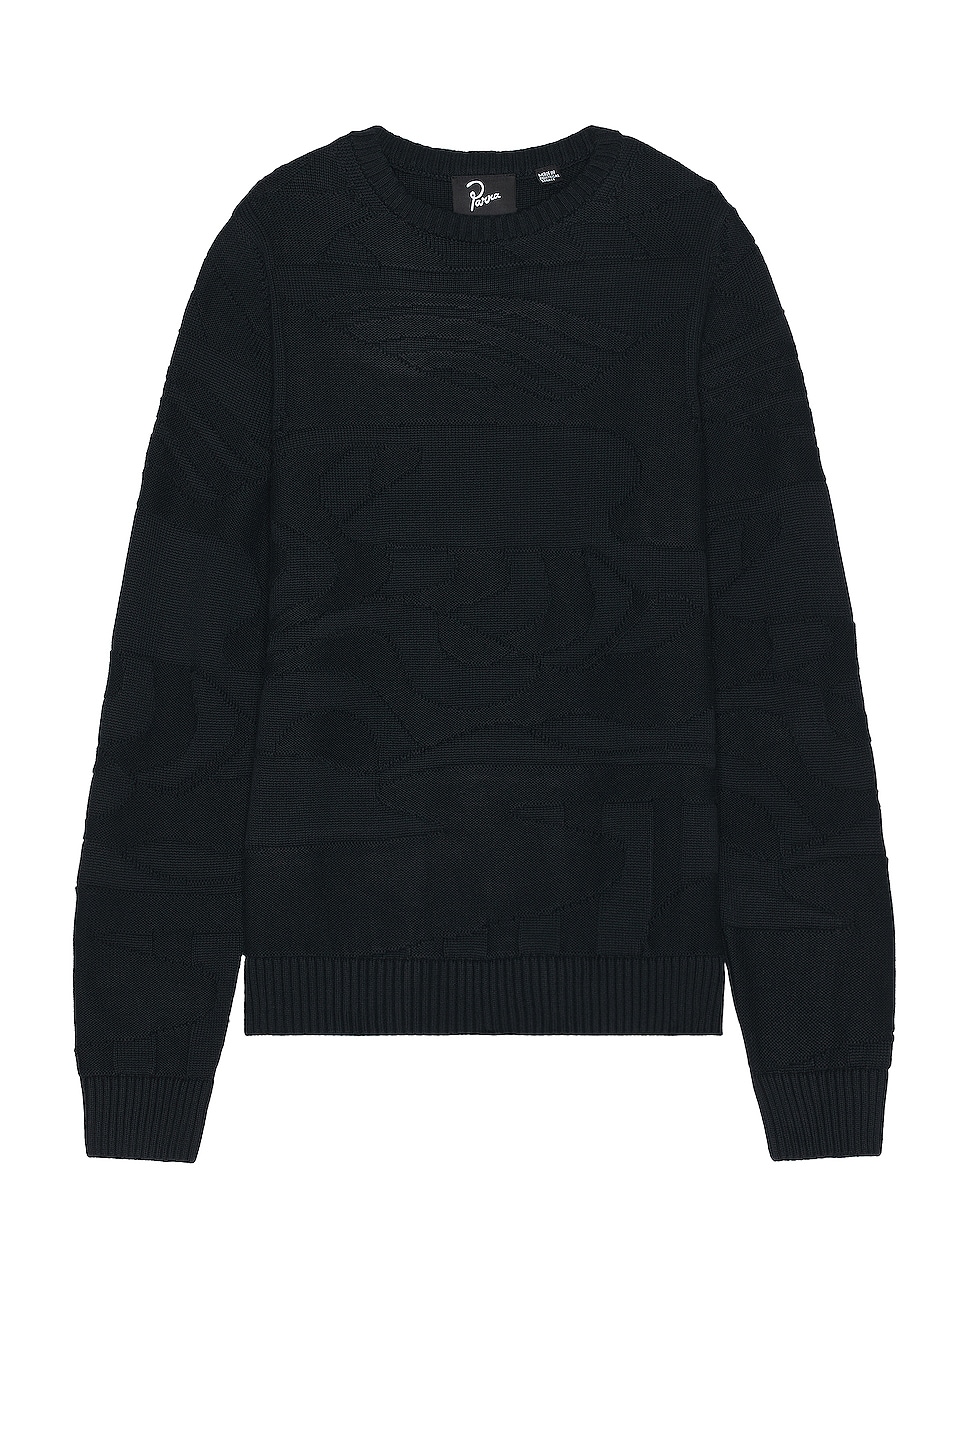 Image 1 of By Parra Landscaped Knitted Sweater in Navy Blue